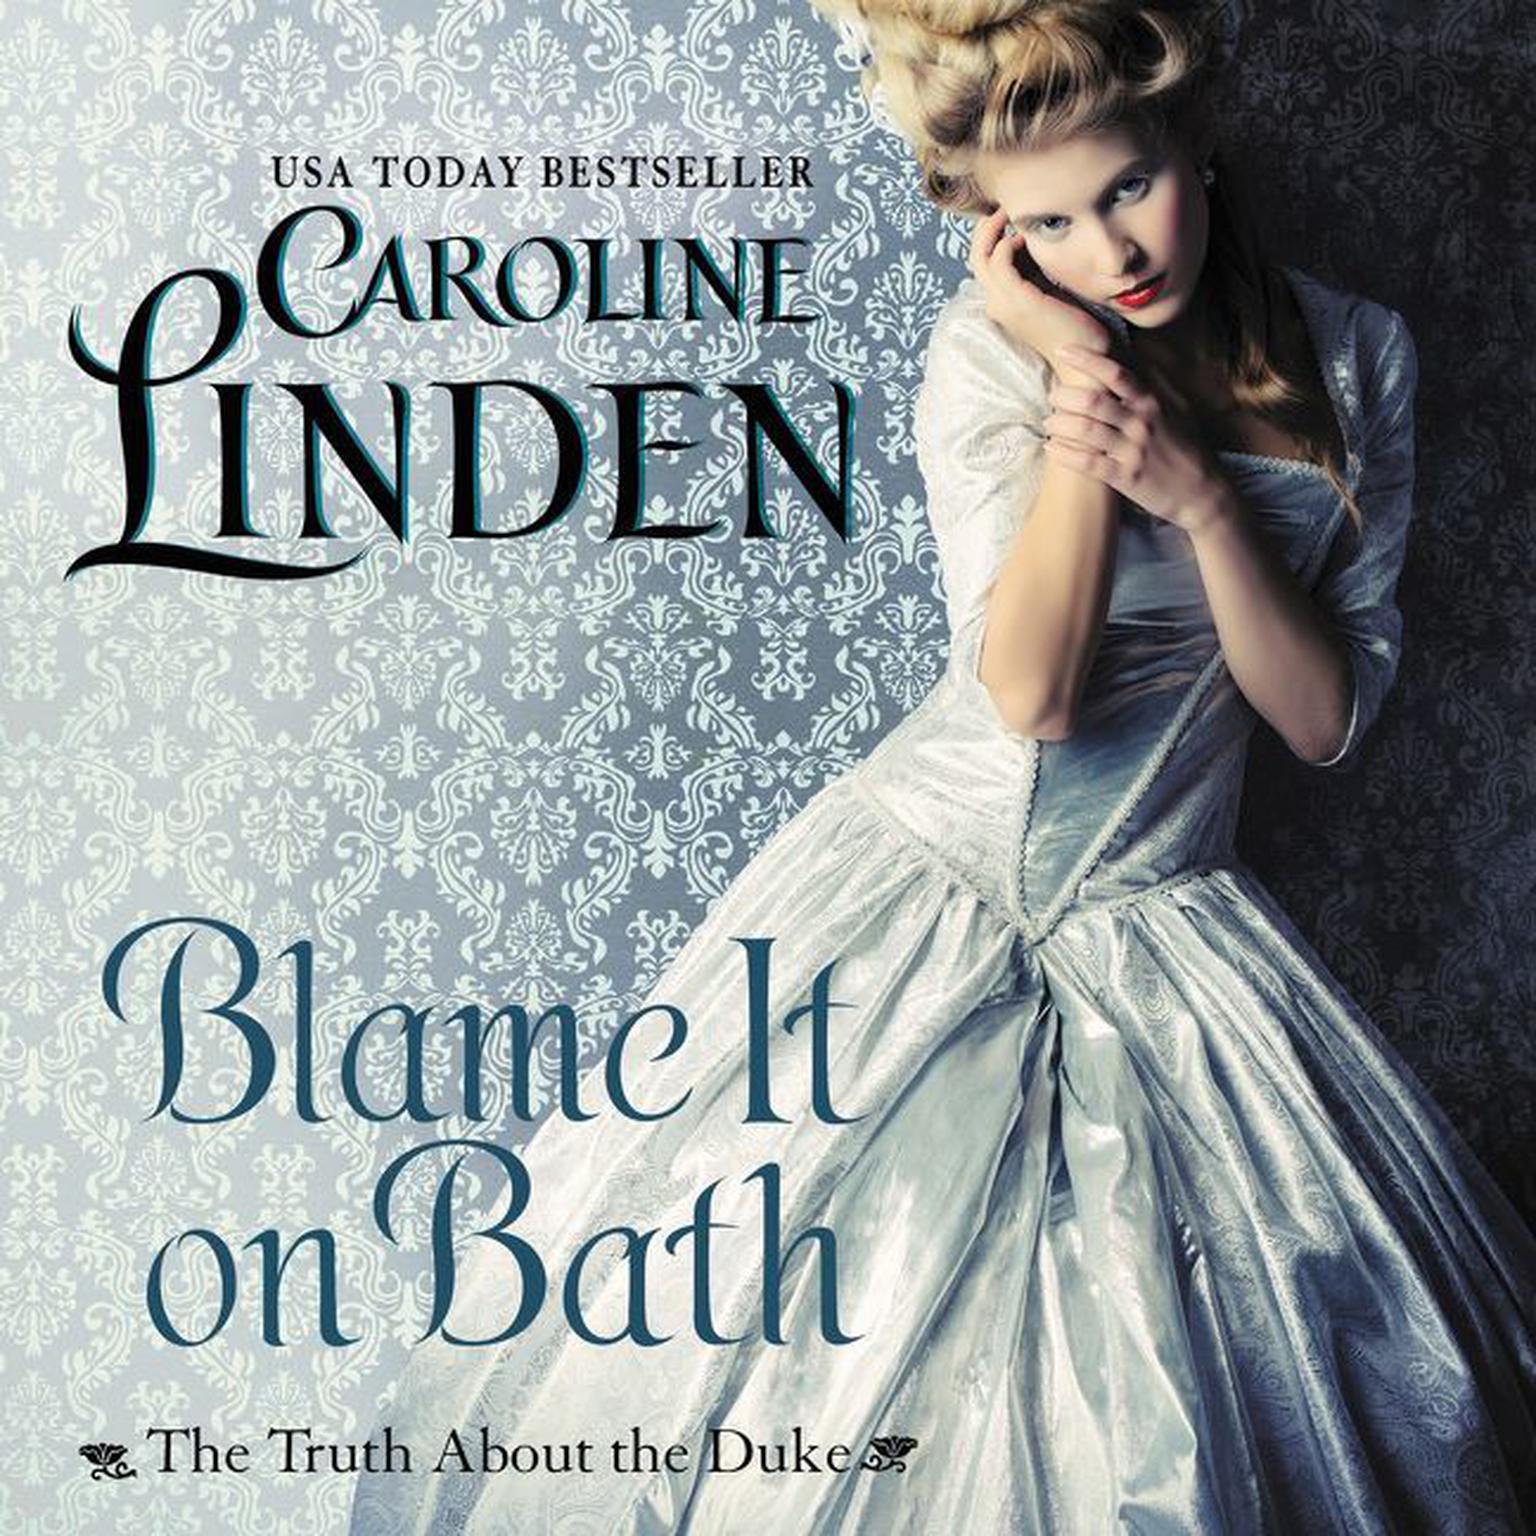 Blame It on Bath: The Truth About the Duke Audiobook, by Caroline Linden